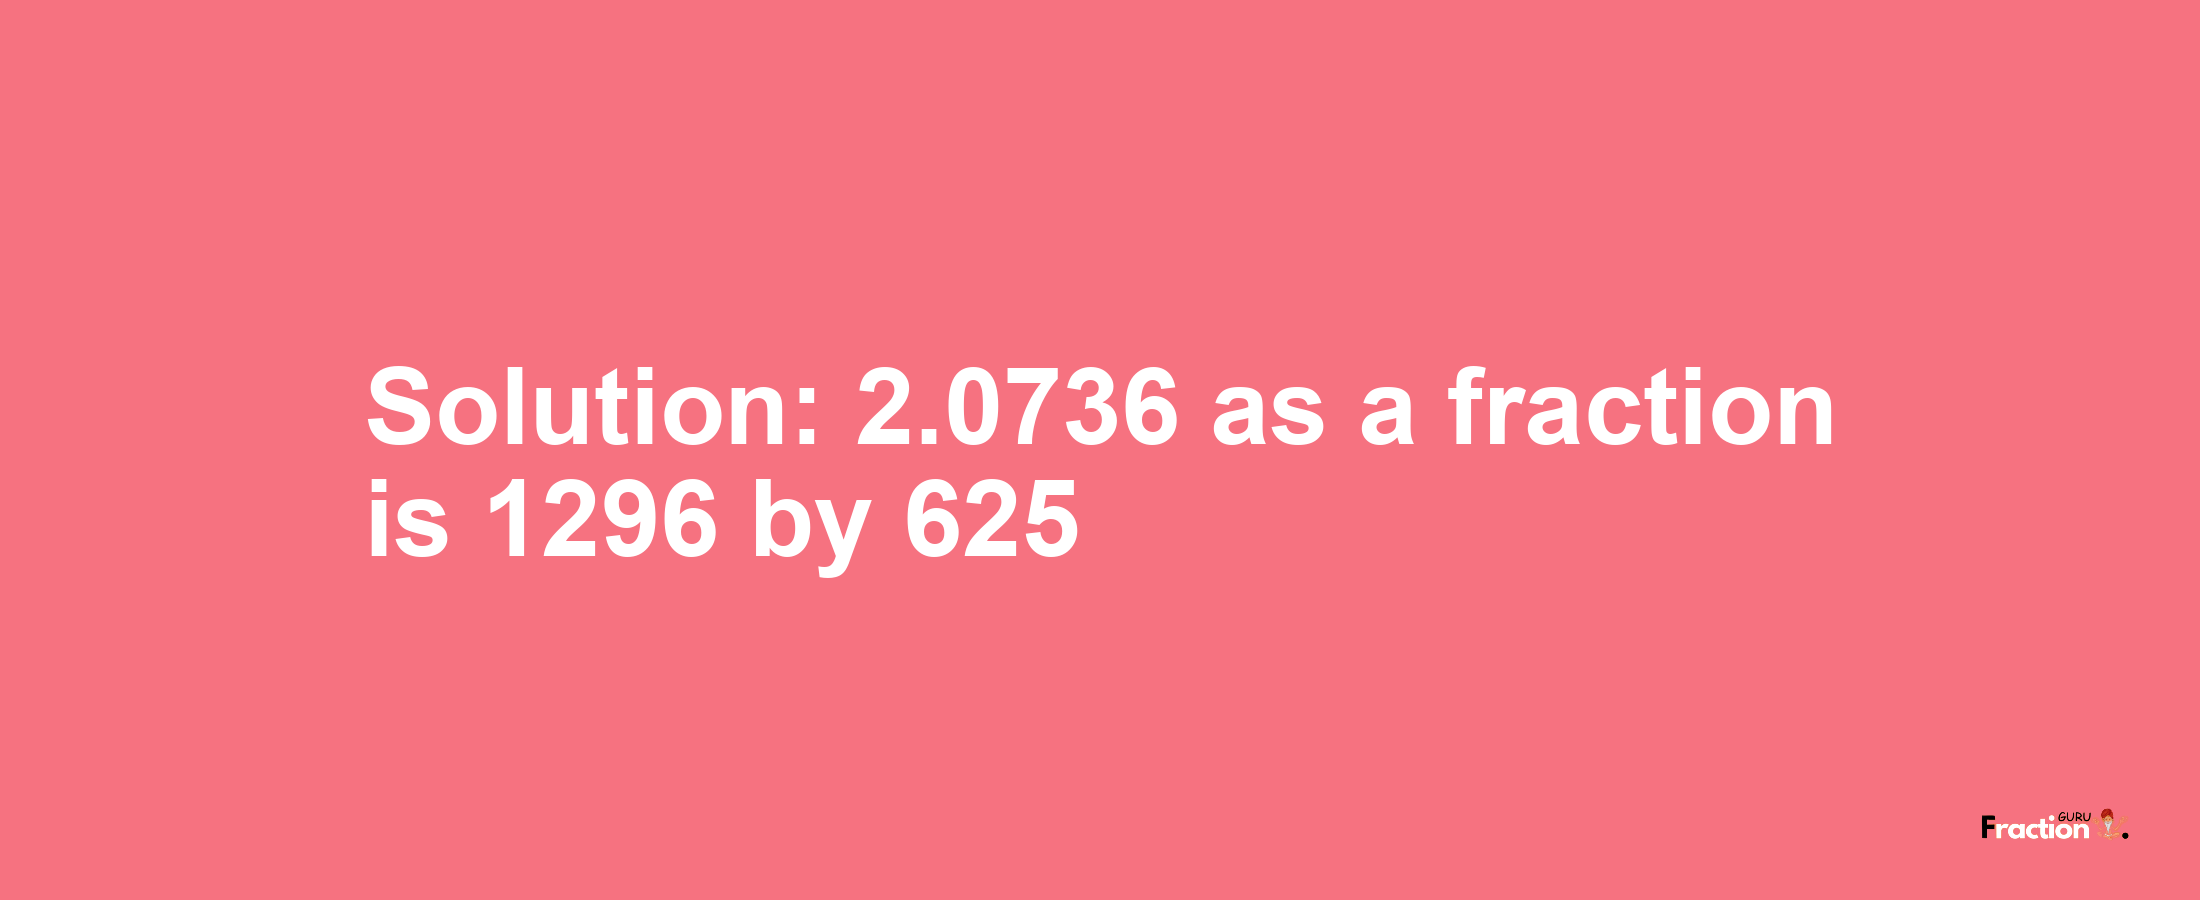 Solution:2.0736 as a fraction is 1296/625